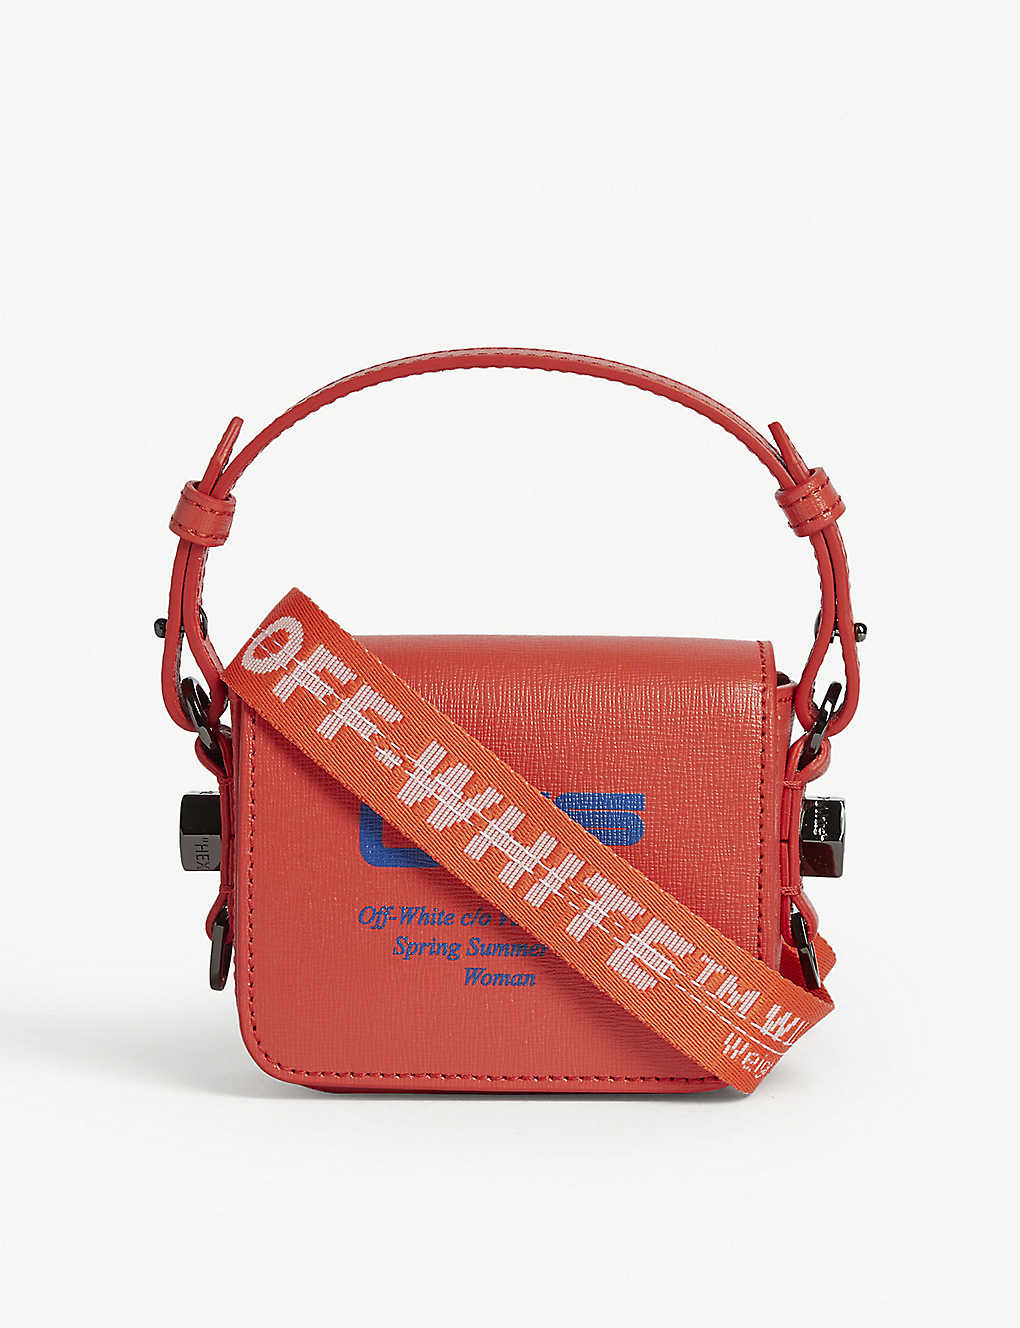 OFF-WHITE LOGO LEATHER BABY FLAP BAG,33340554